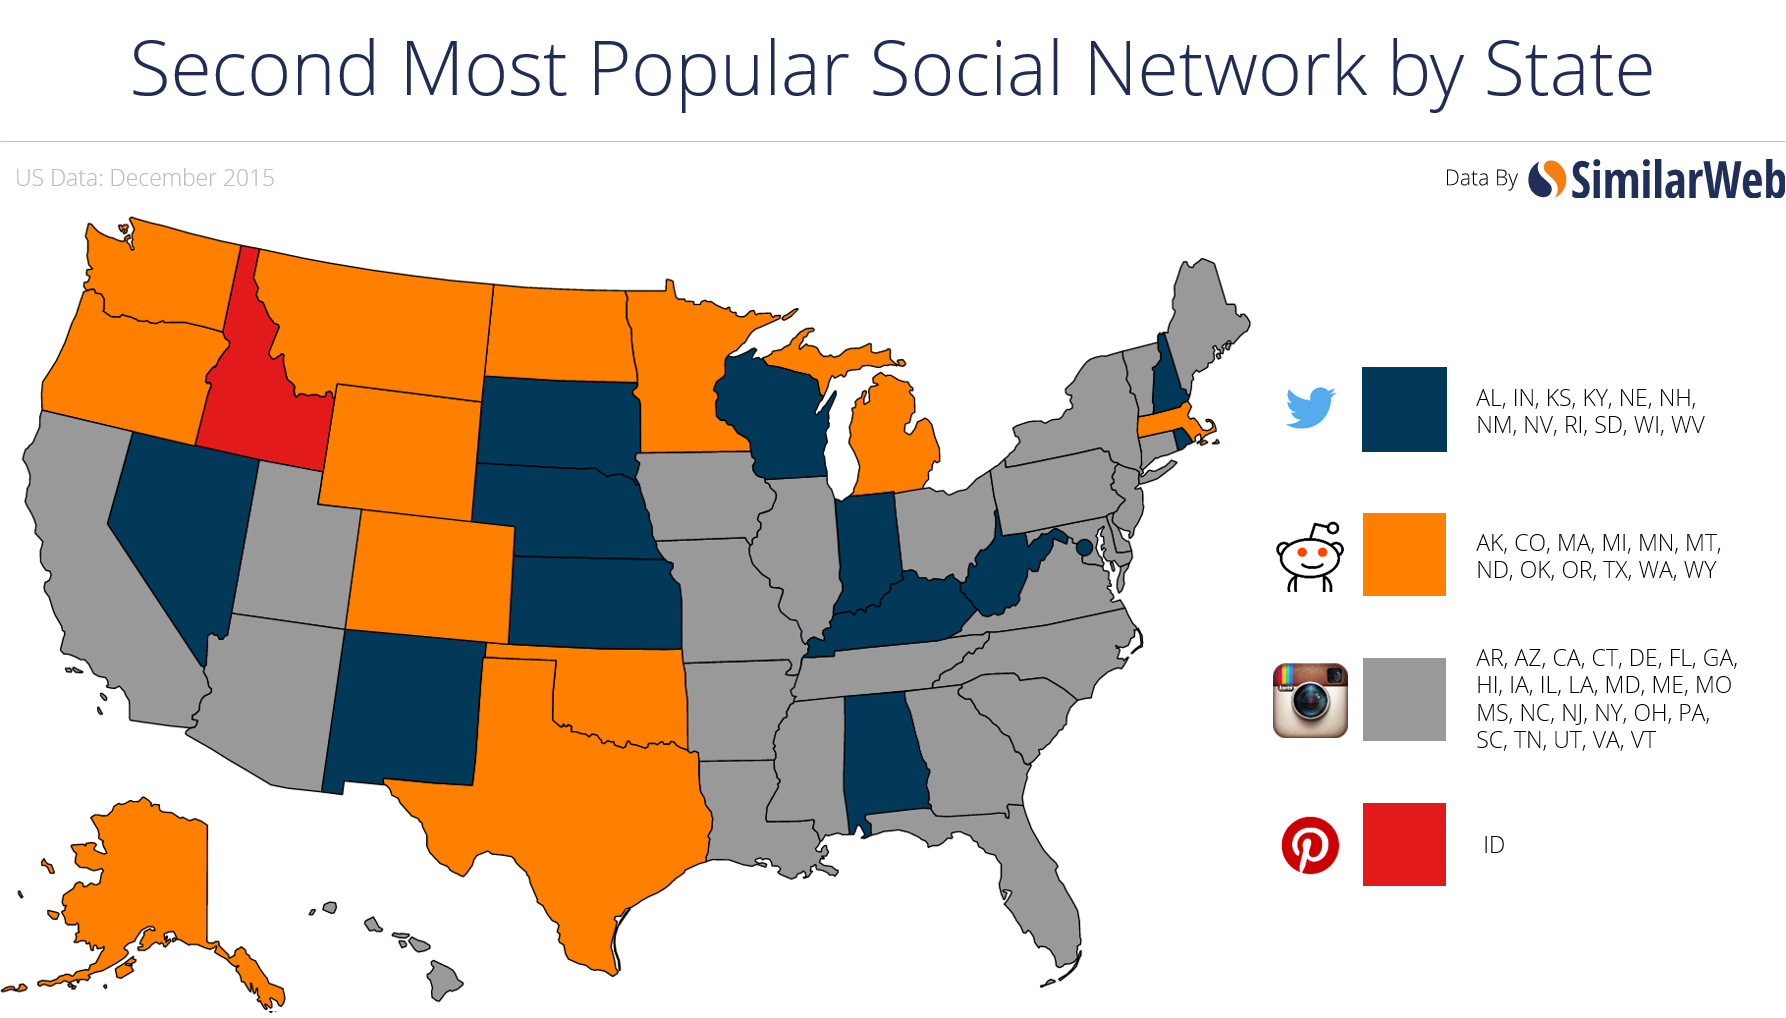 Second Most Popular Social Network by State